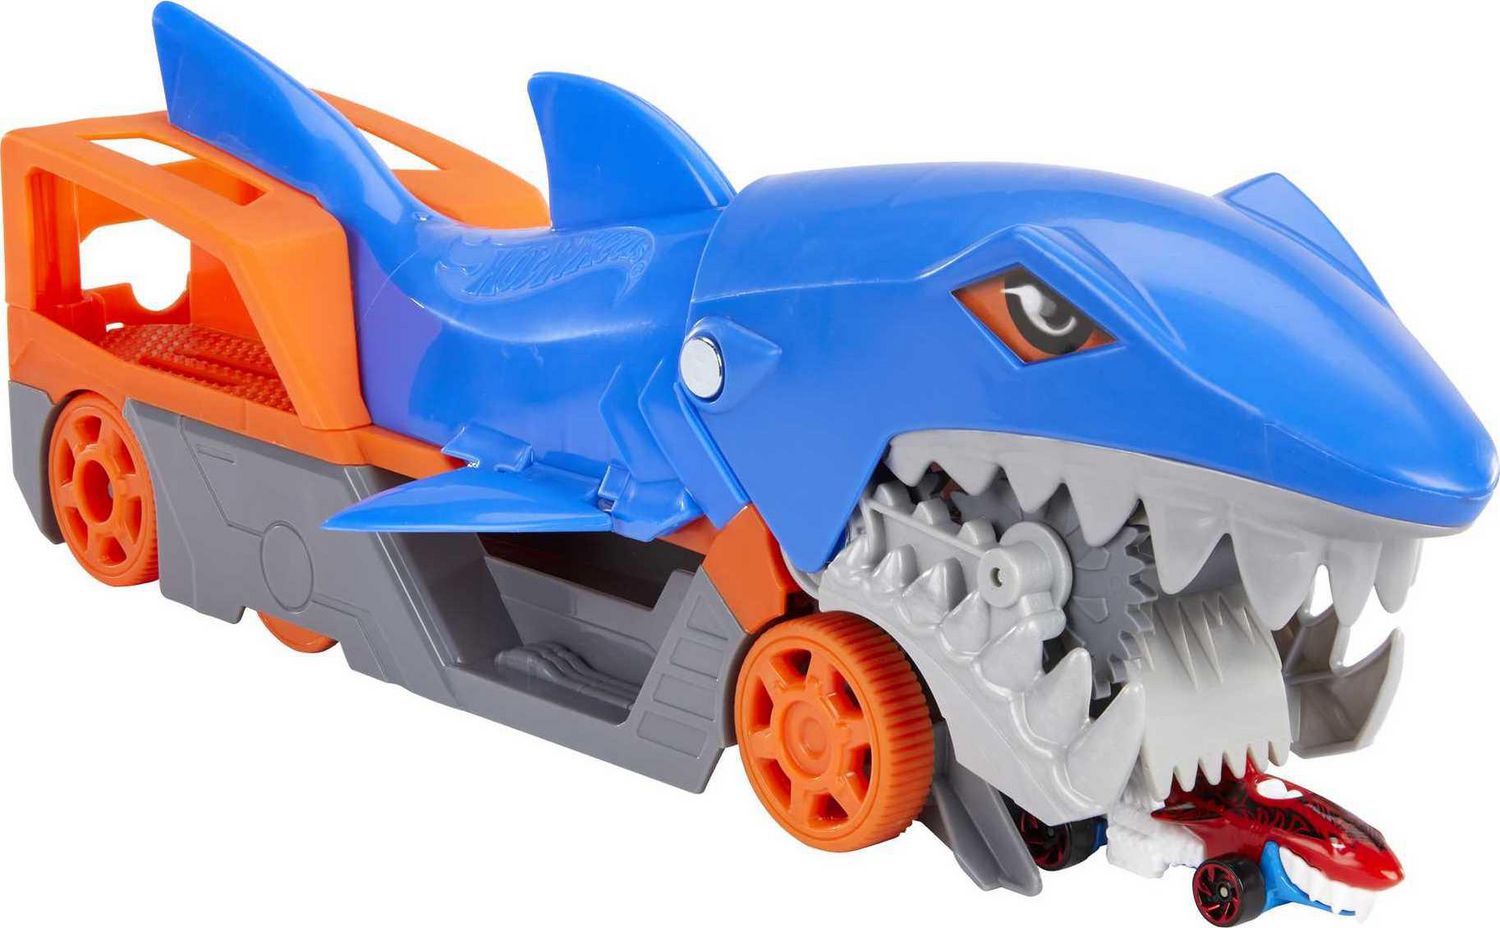 Hot Wheels Shark Chomp Transporter Playset with One 1:64 Scale Car for Kids  4 to 8 Years Old, Shark Bite Hauler Picks Up Cars in Its Jaws & Stores Up 